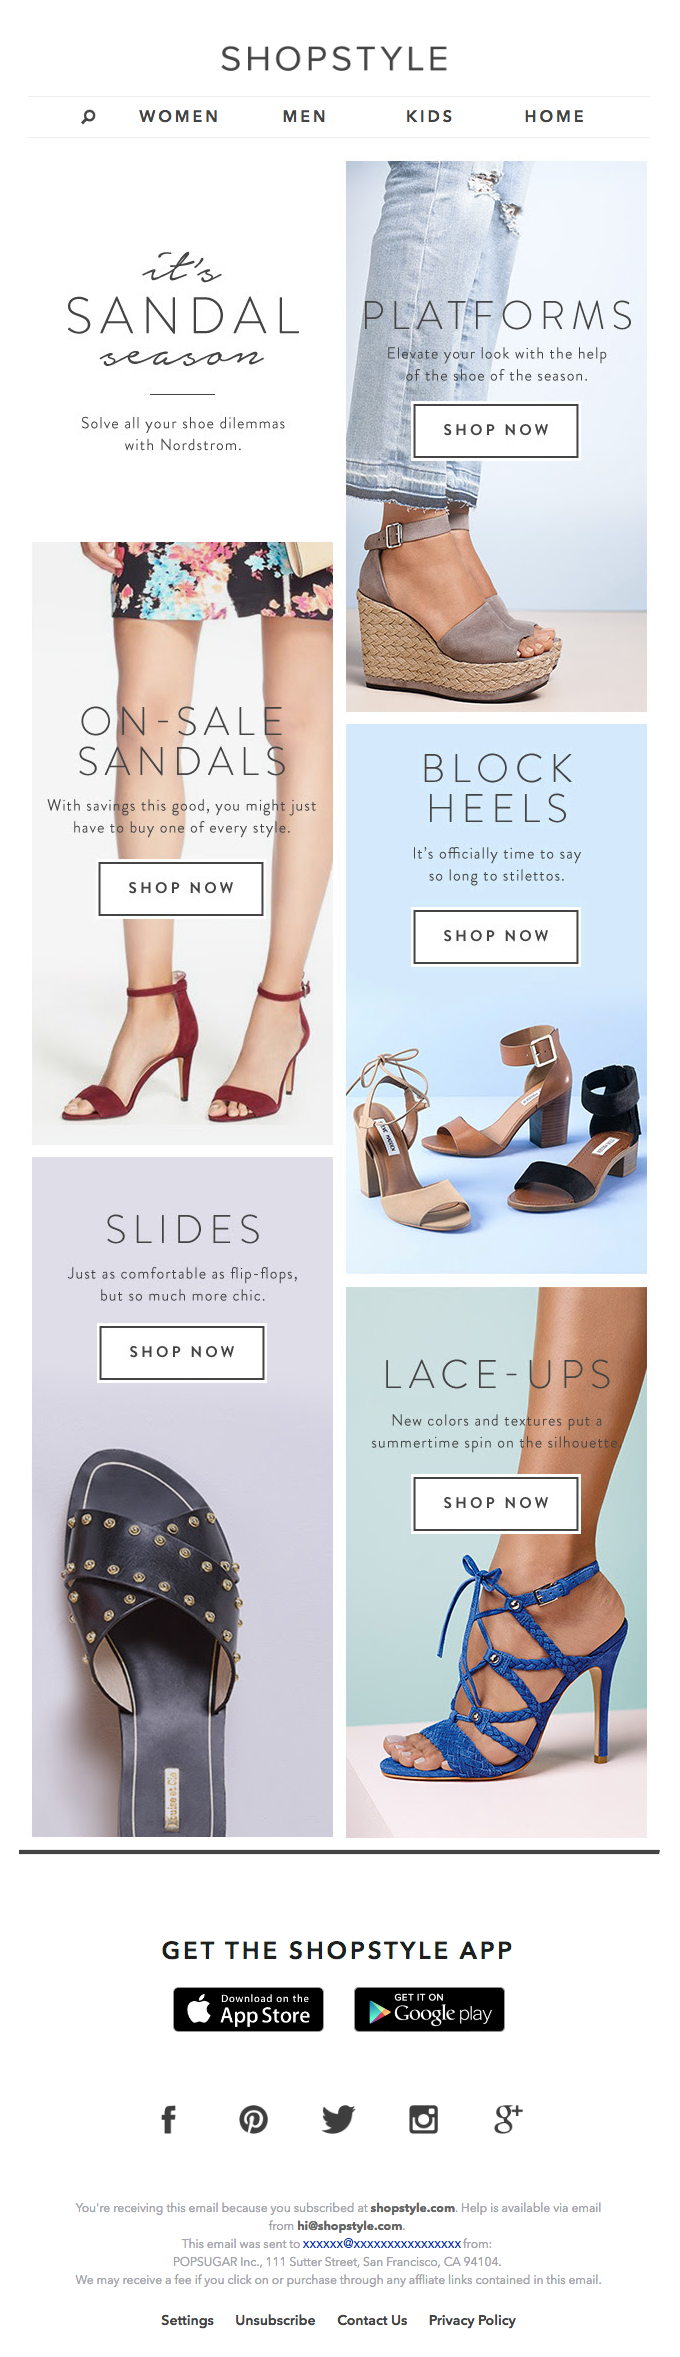 The 5 Need-Now Nordstrom Sandals